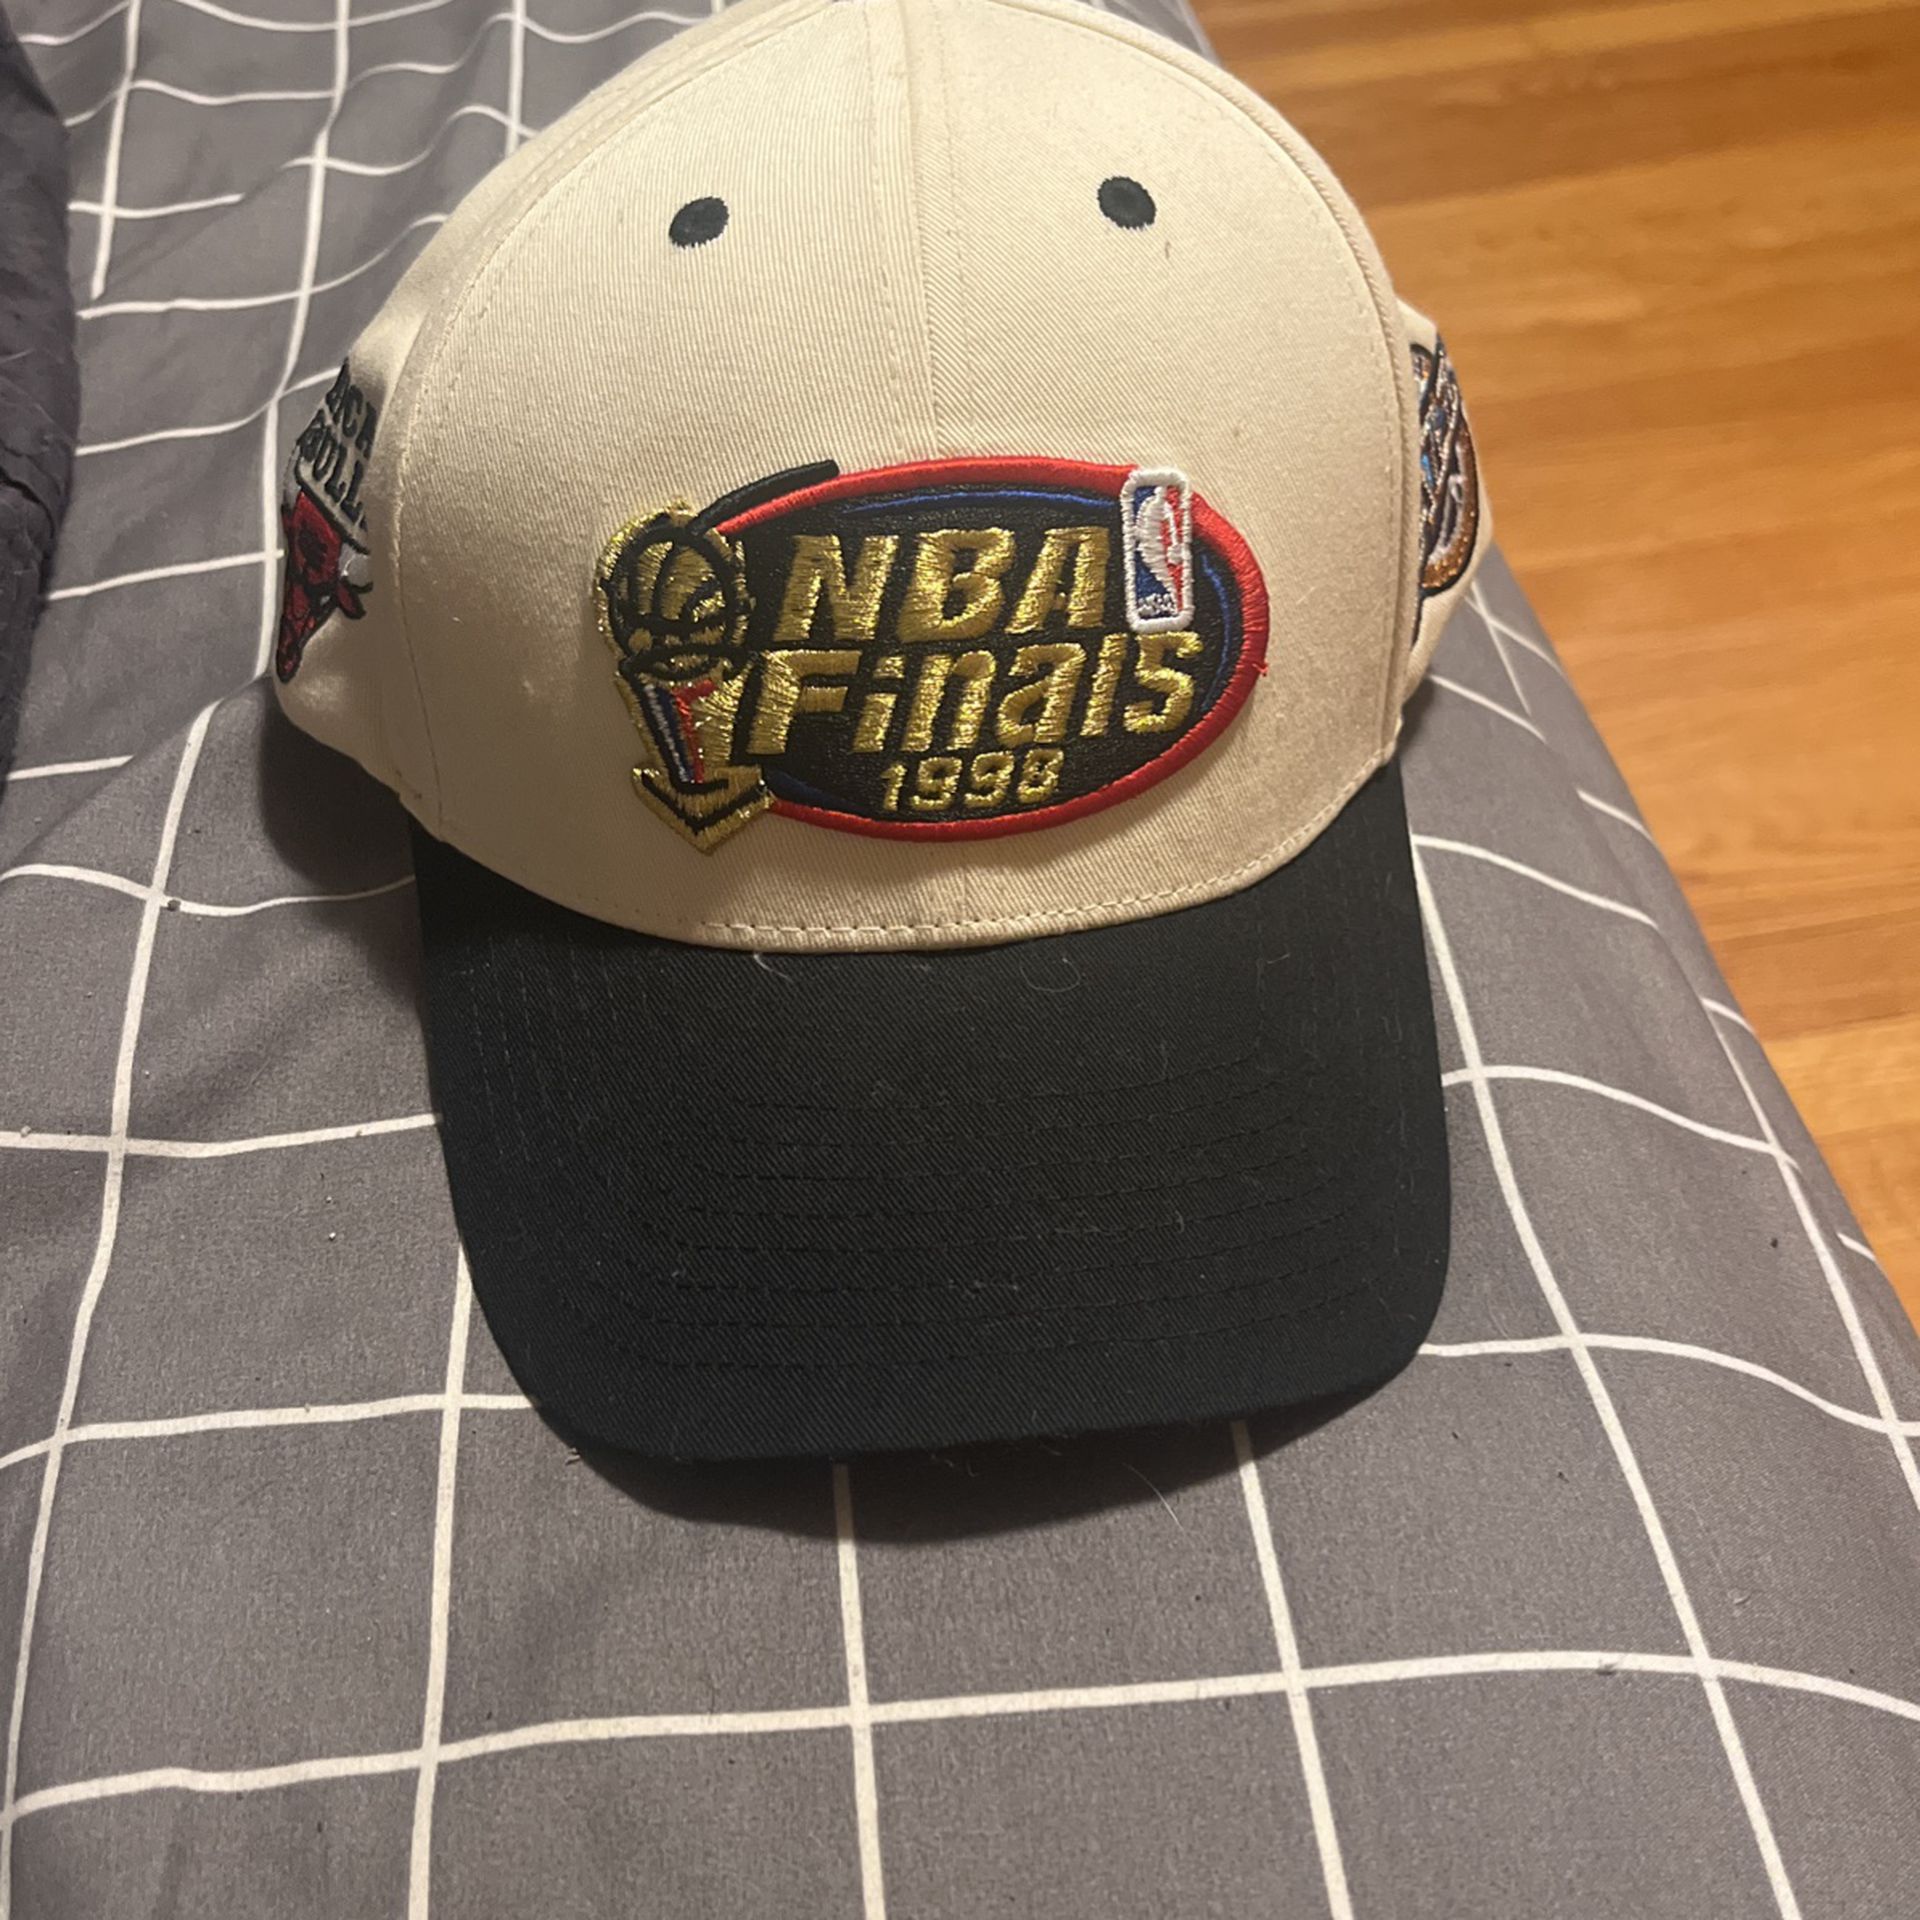 1998 NBA Bulls finals Hat for Sale in Downers Grove, IL - OfferUp